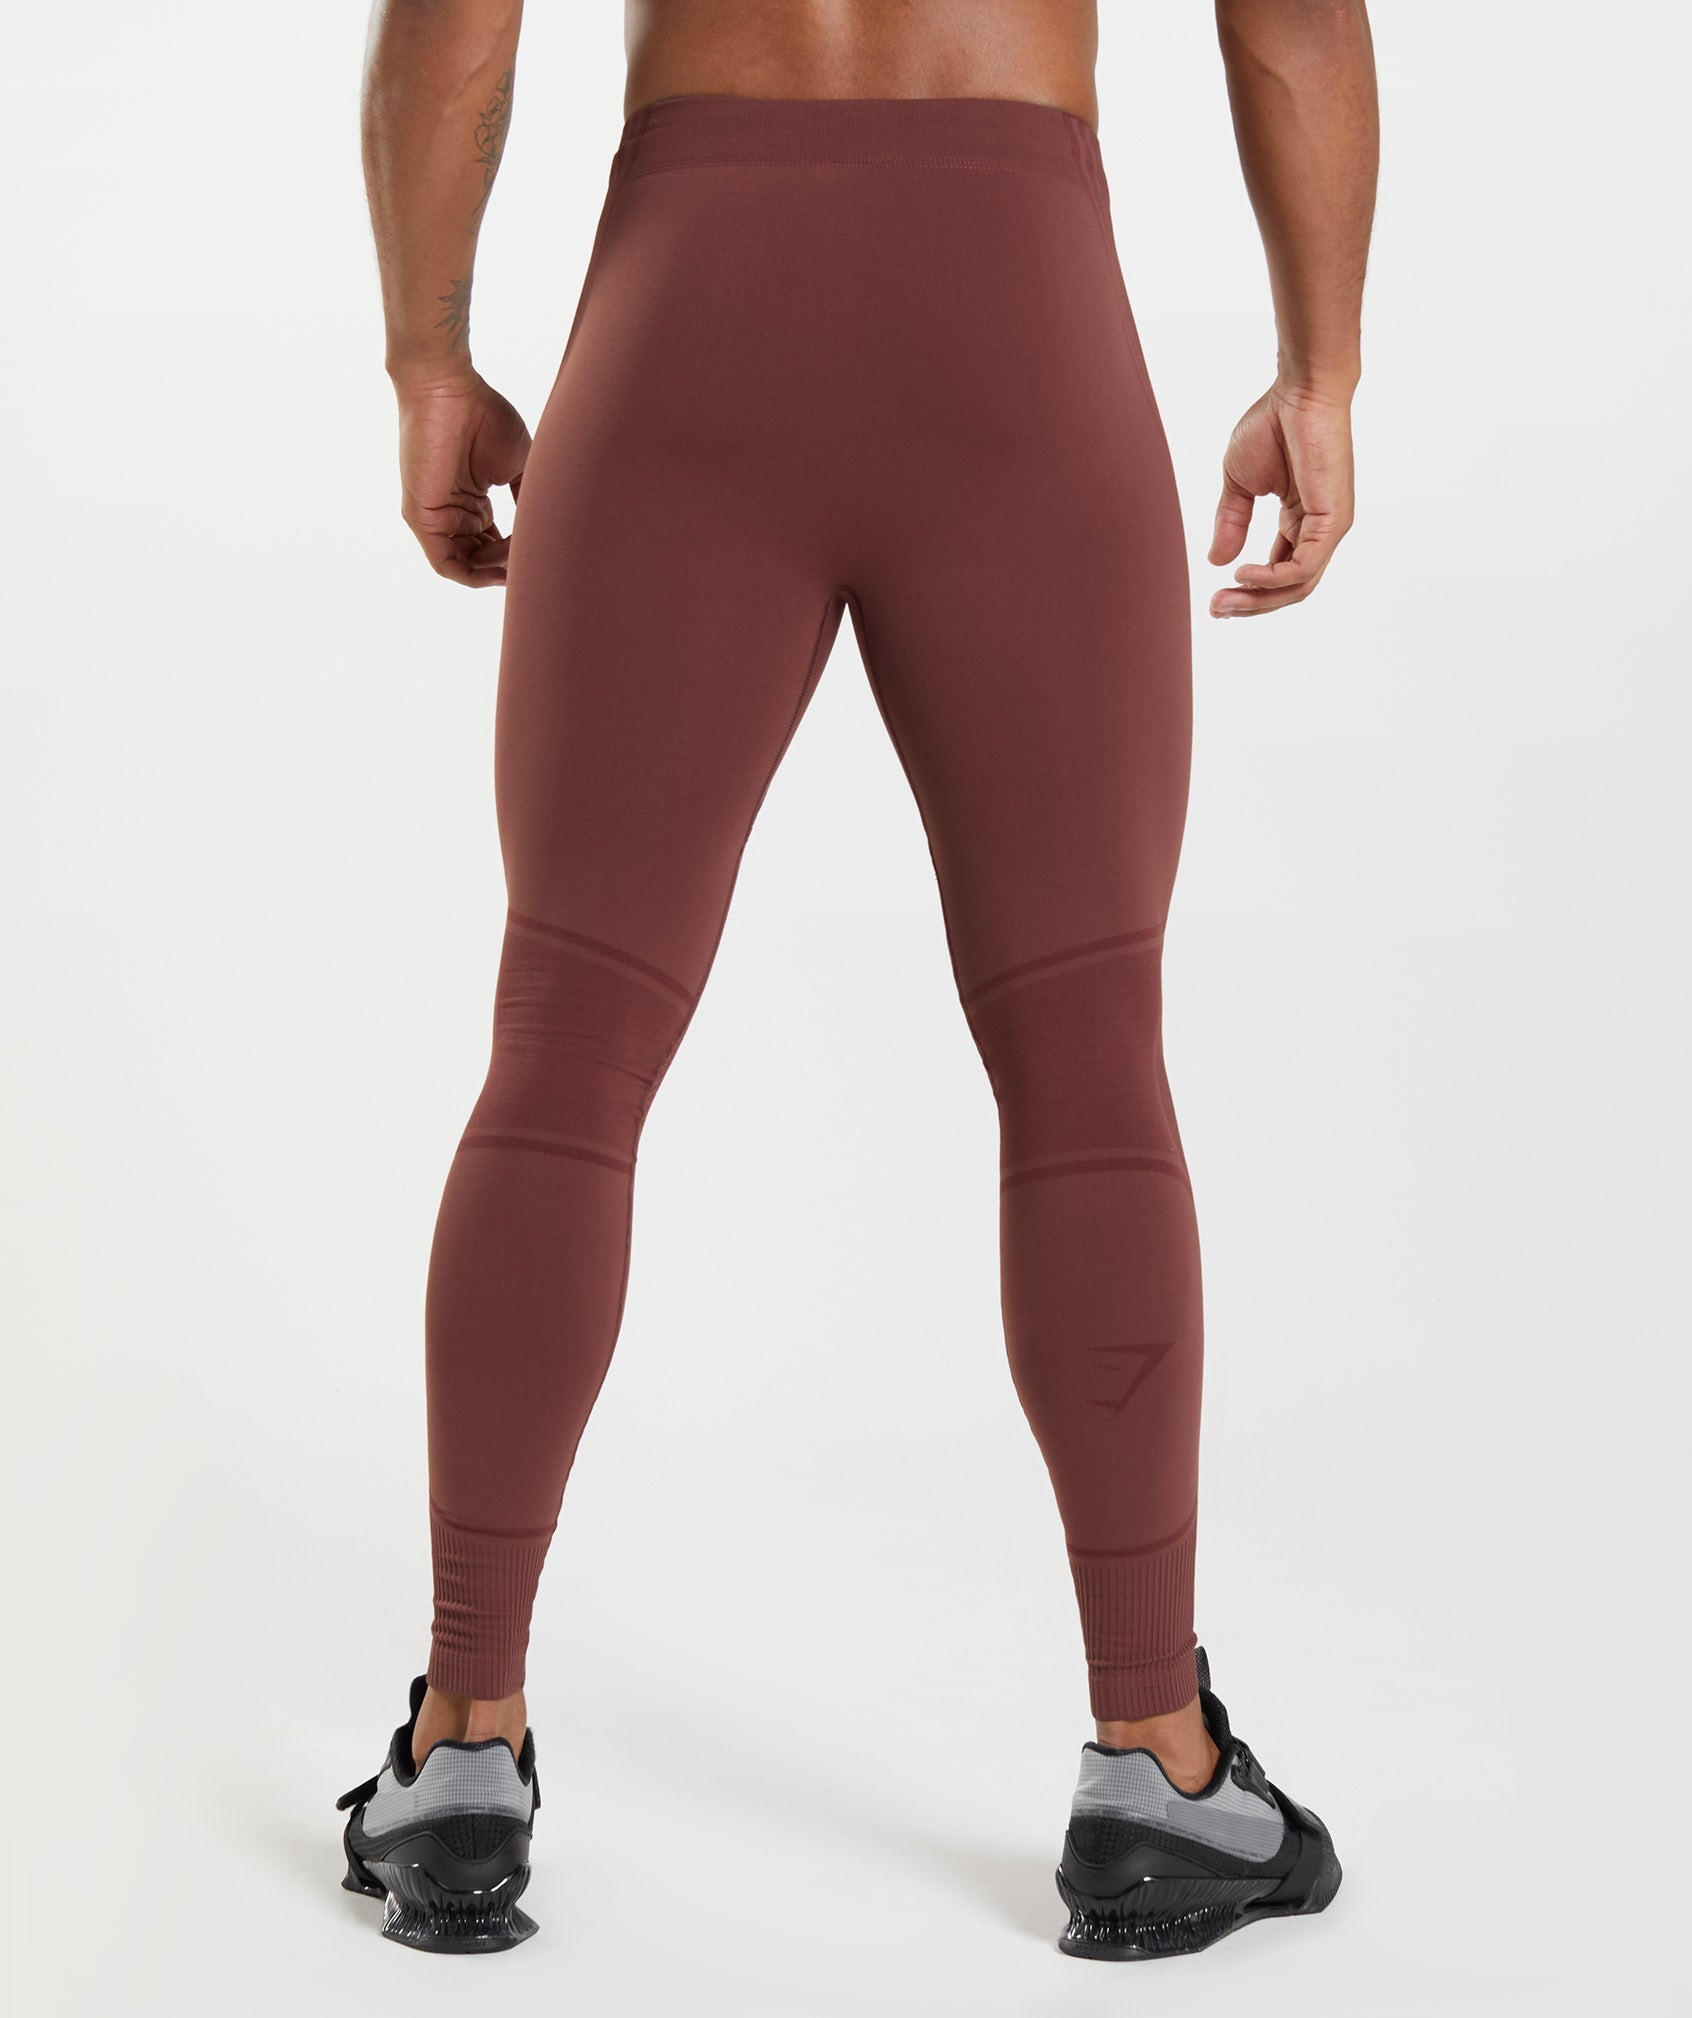 Gymshark 315 Seamless Tights - Cherry Brown/Athletic Maroon